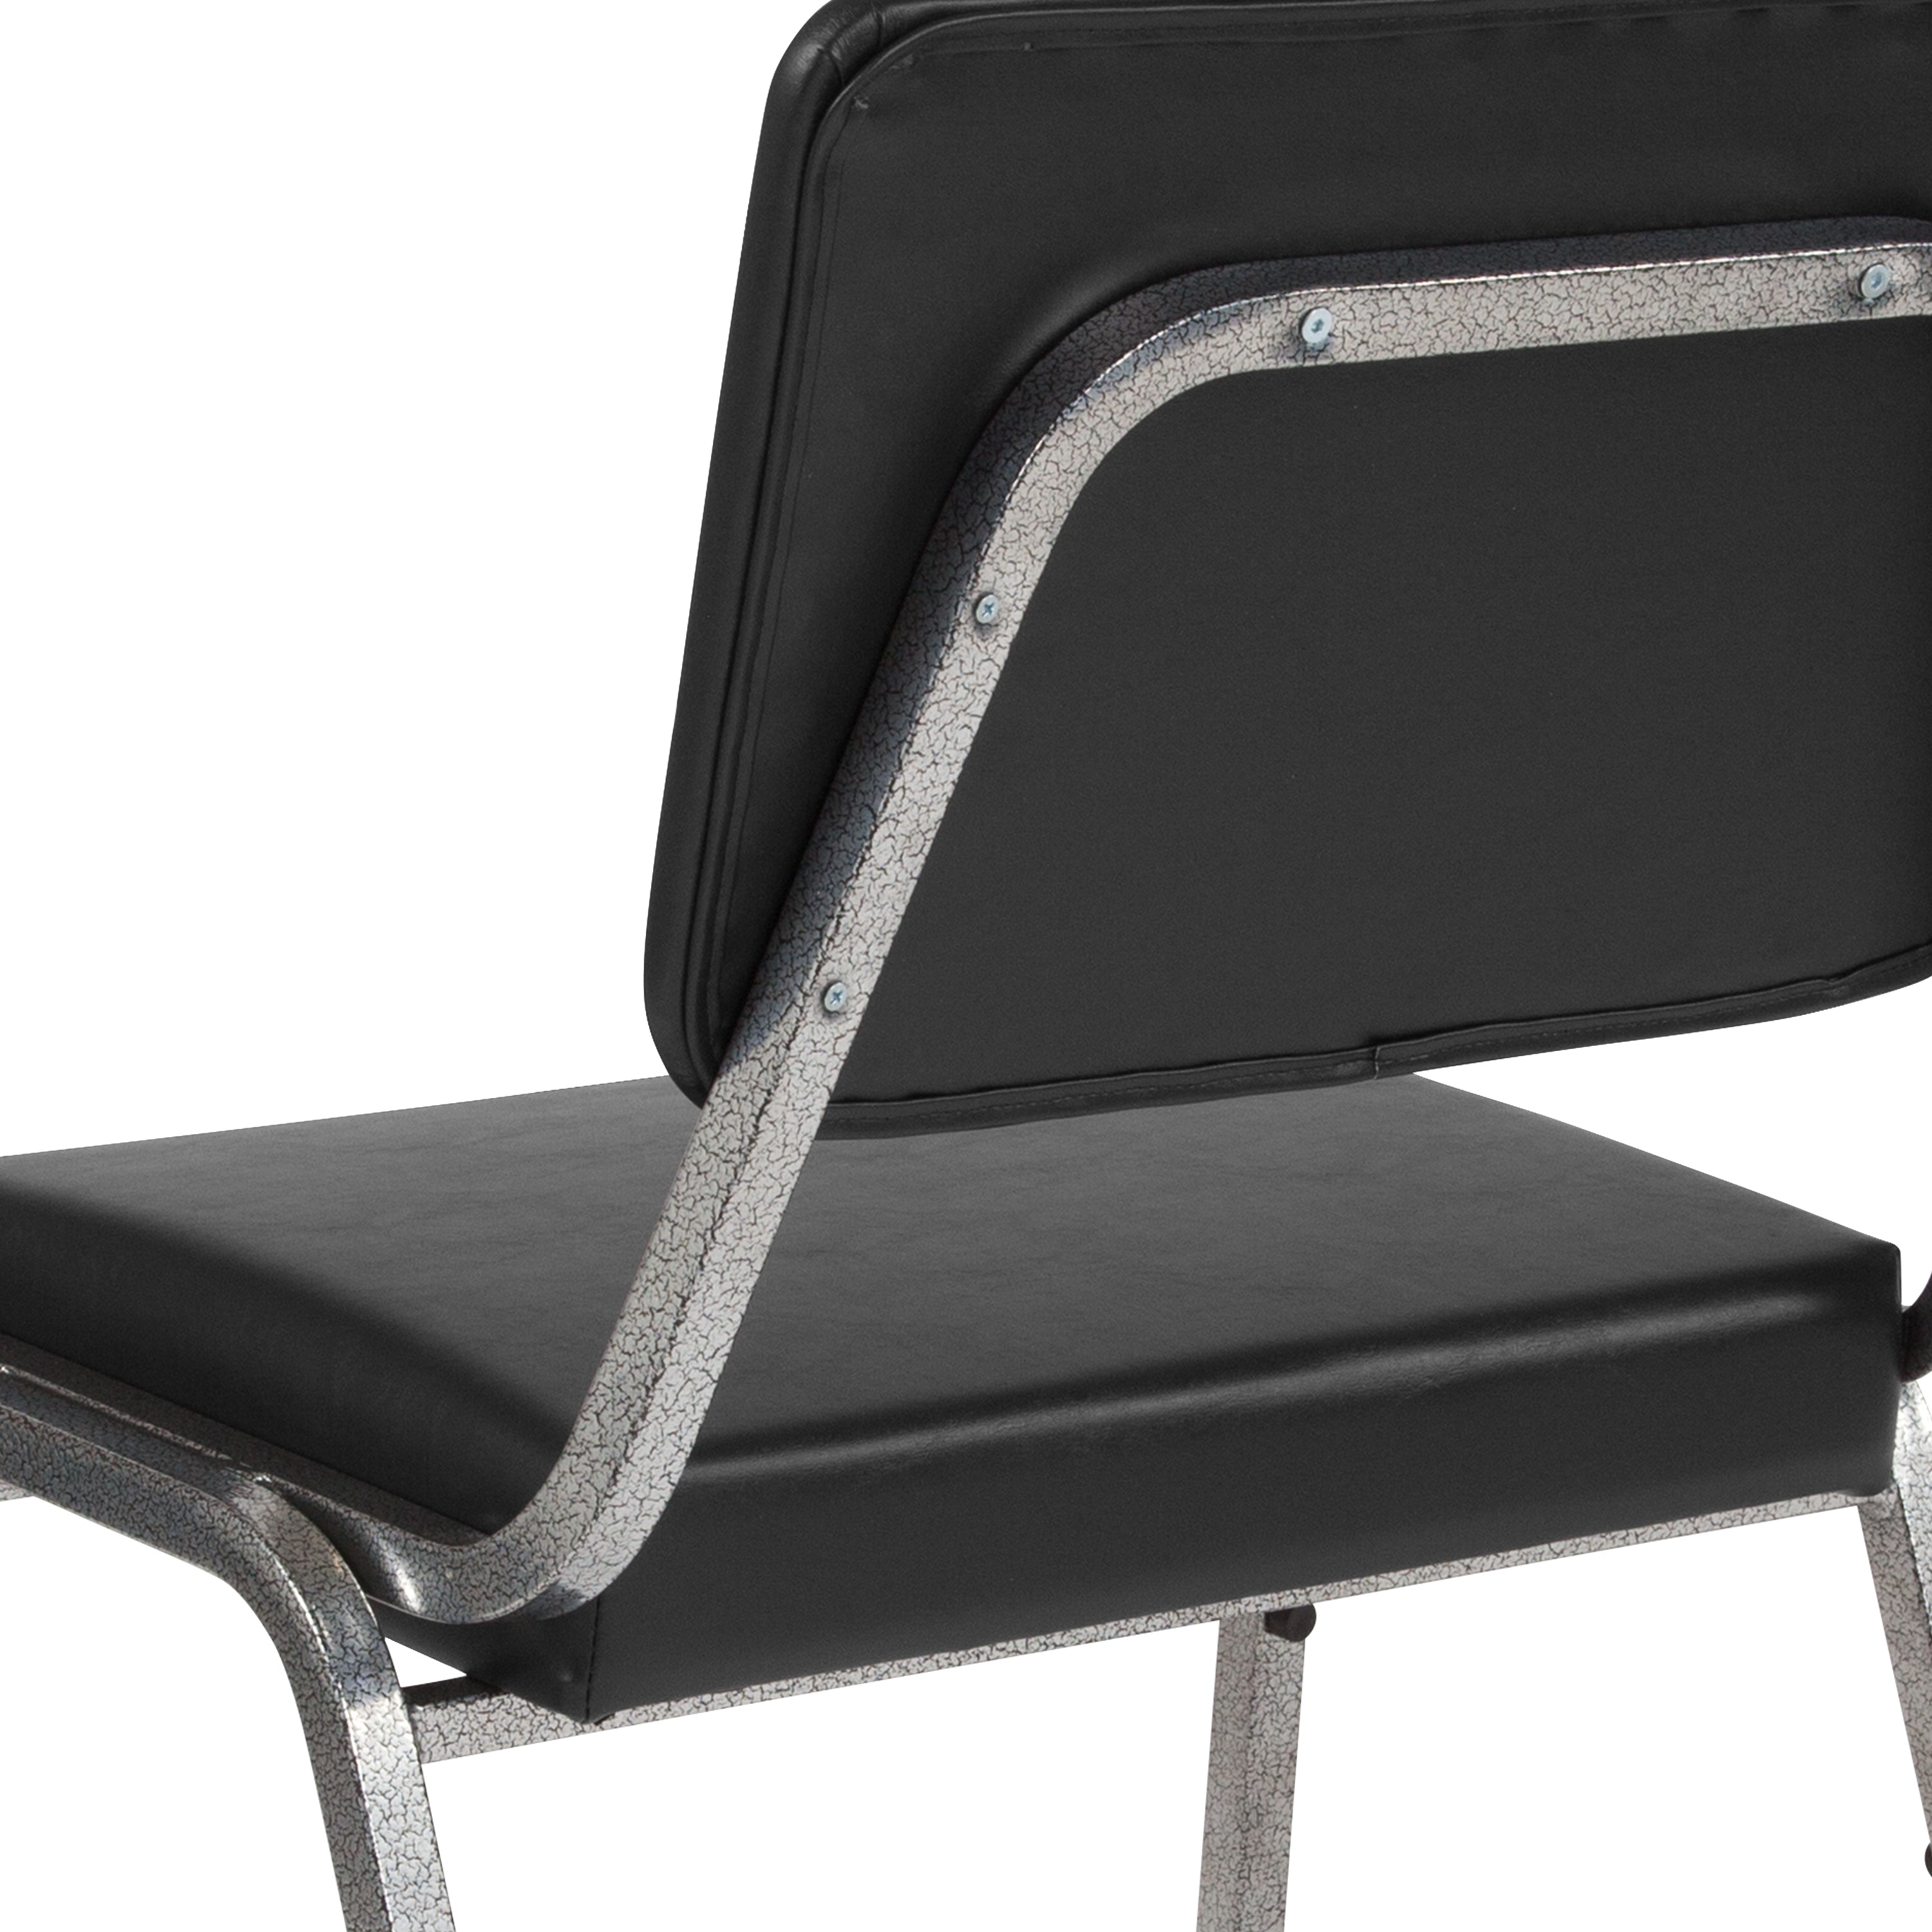 HERCULES Series 1000 lb. Rated Antimicrobial Bariatric medical Reception Chair with 3/4 Panel Back-Bariatric Antimicrobial Stack Chair-Flash Furniture-Wall2Wall Furnishings